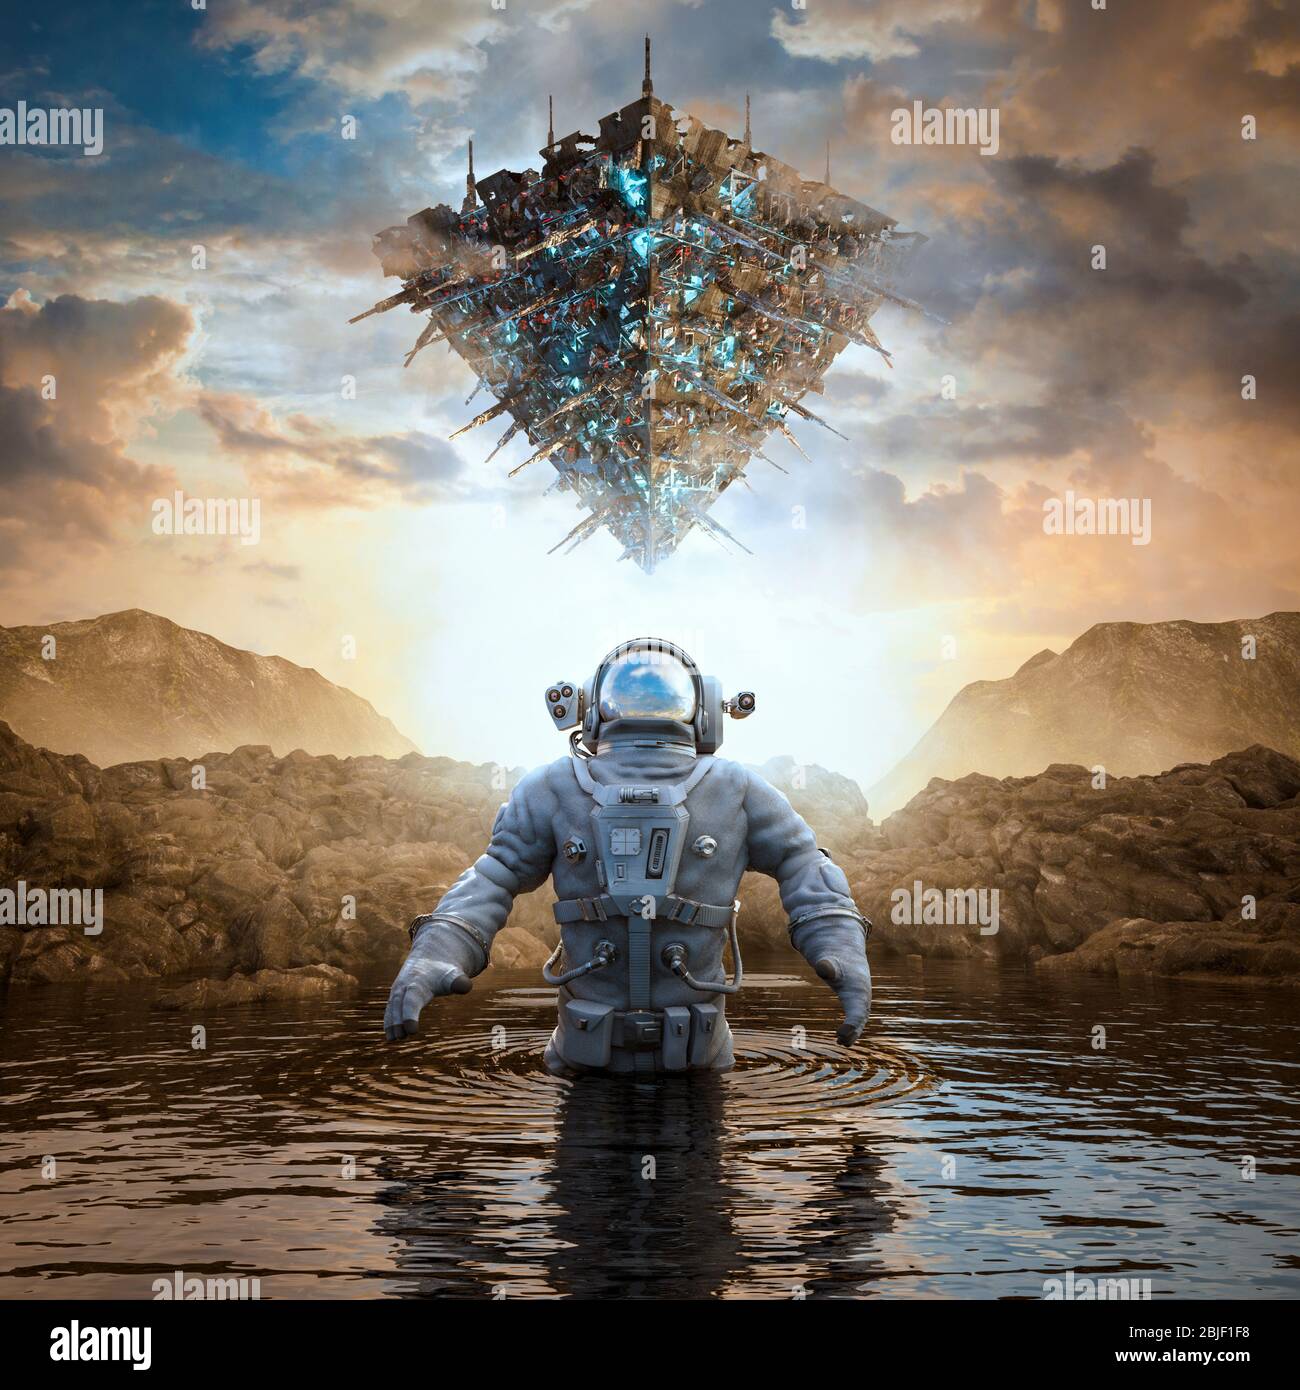 Planet of the ancients / 3D illustration of science fiction scene with astronaut encountering giant space ship on alien world Stock Photo